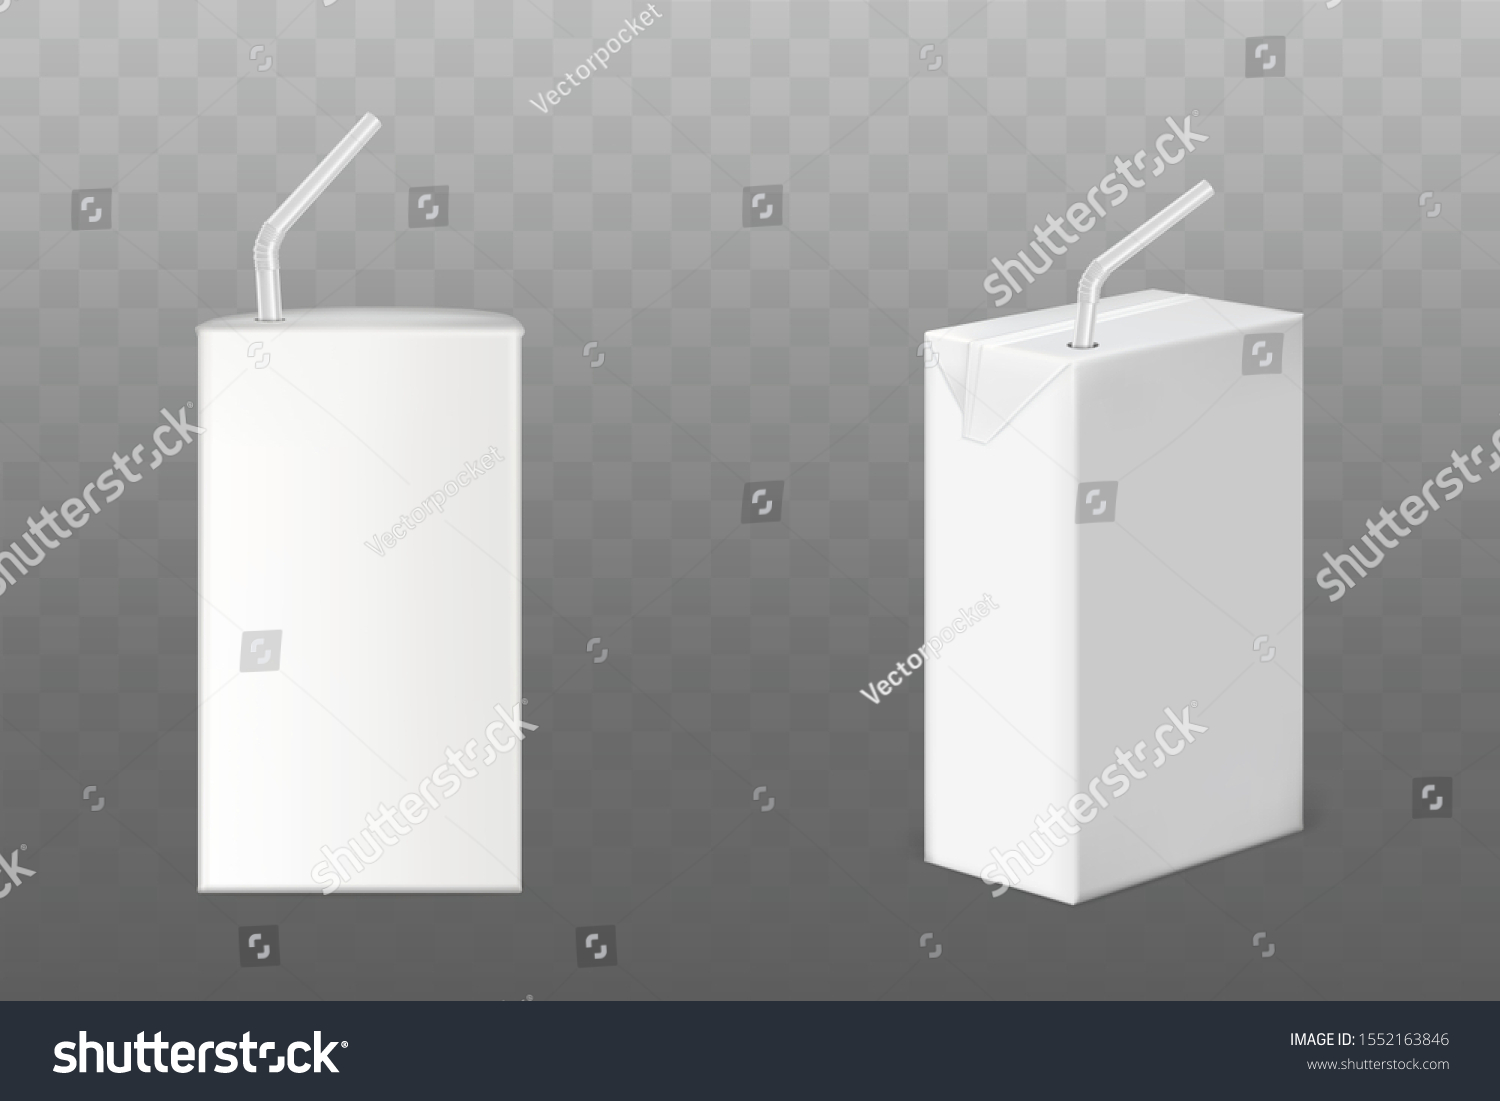 SVG of Juice or milk boxes with straw side front view set, white blank packaging mock up isolated on transparent background. Cardboard liquid production containers. Realistic 3d vector illustration, clip art svg